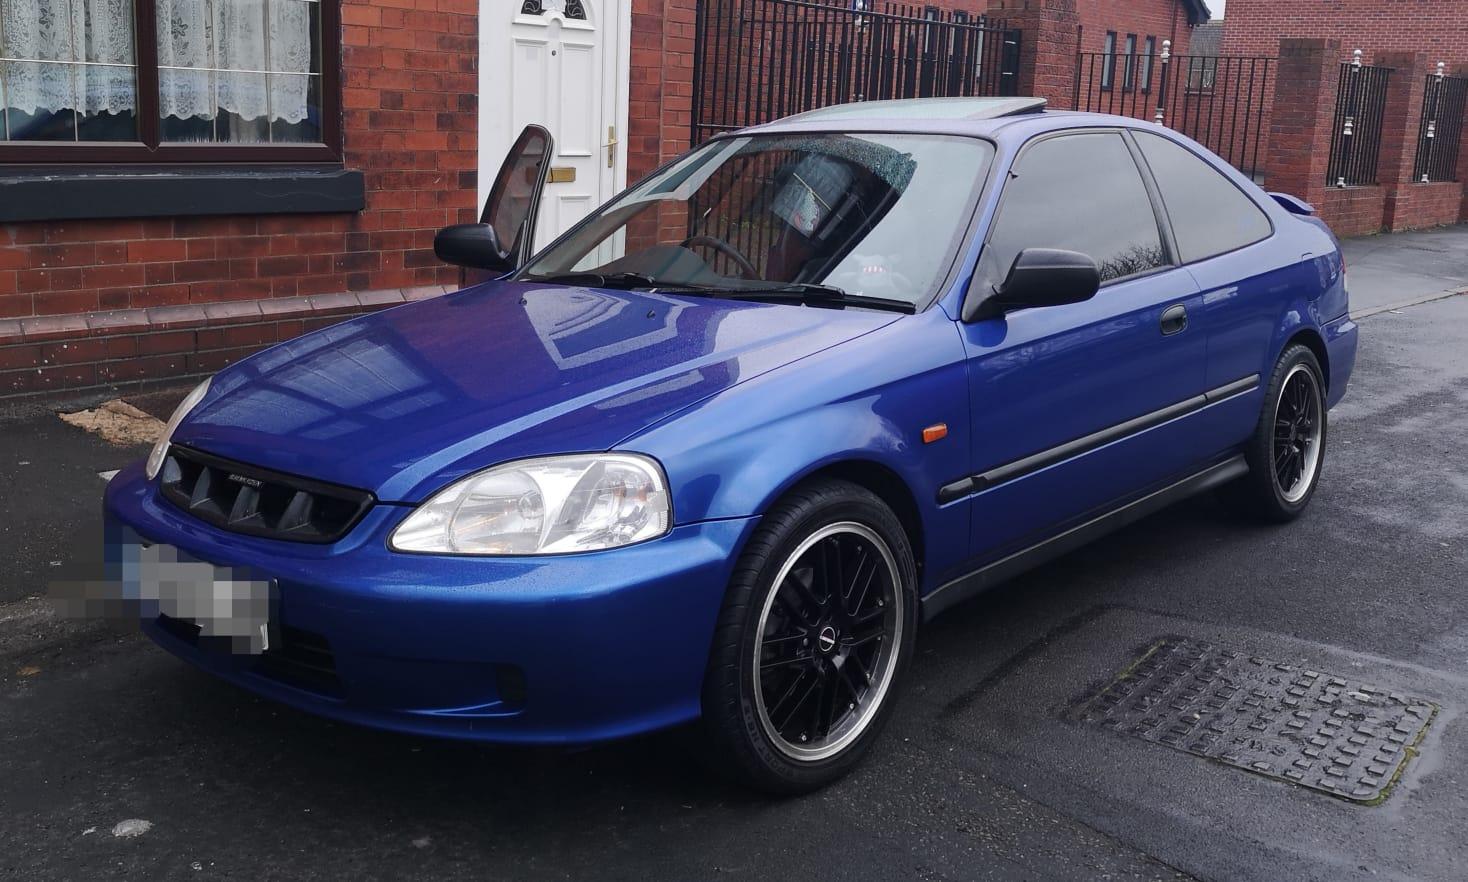 Honda Civic 1.6 Se Coupe 1999 Ej6 in WS10 Walsall for £